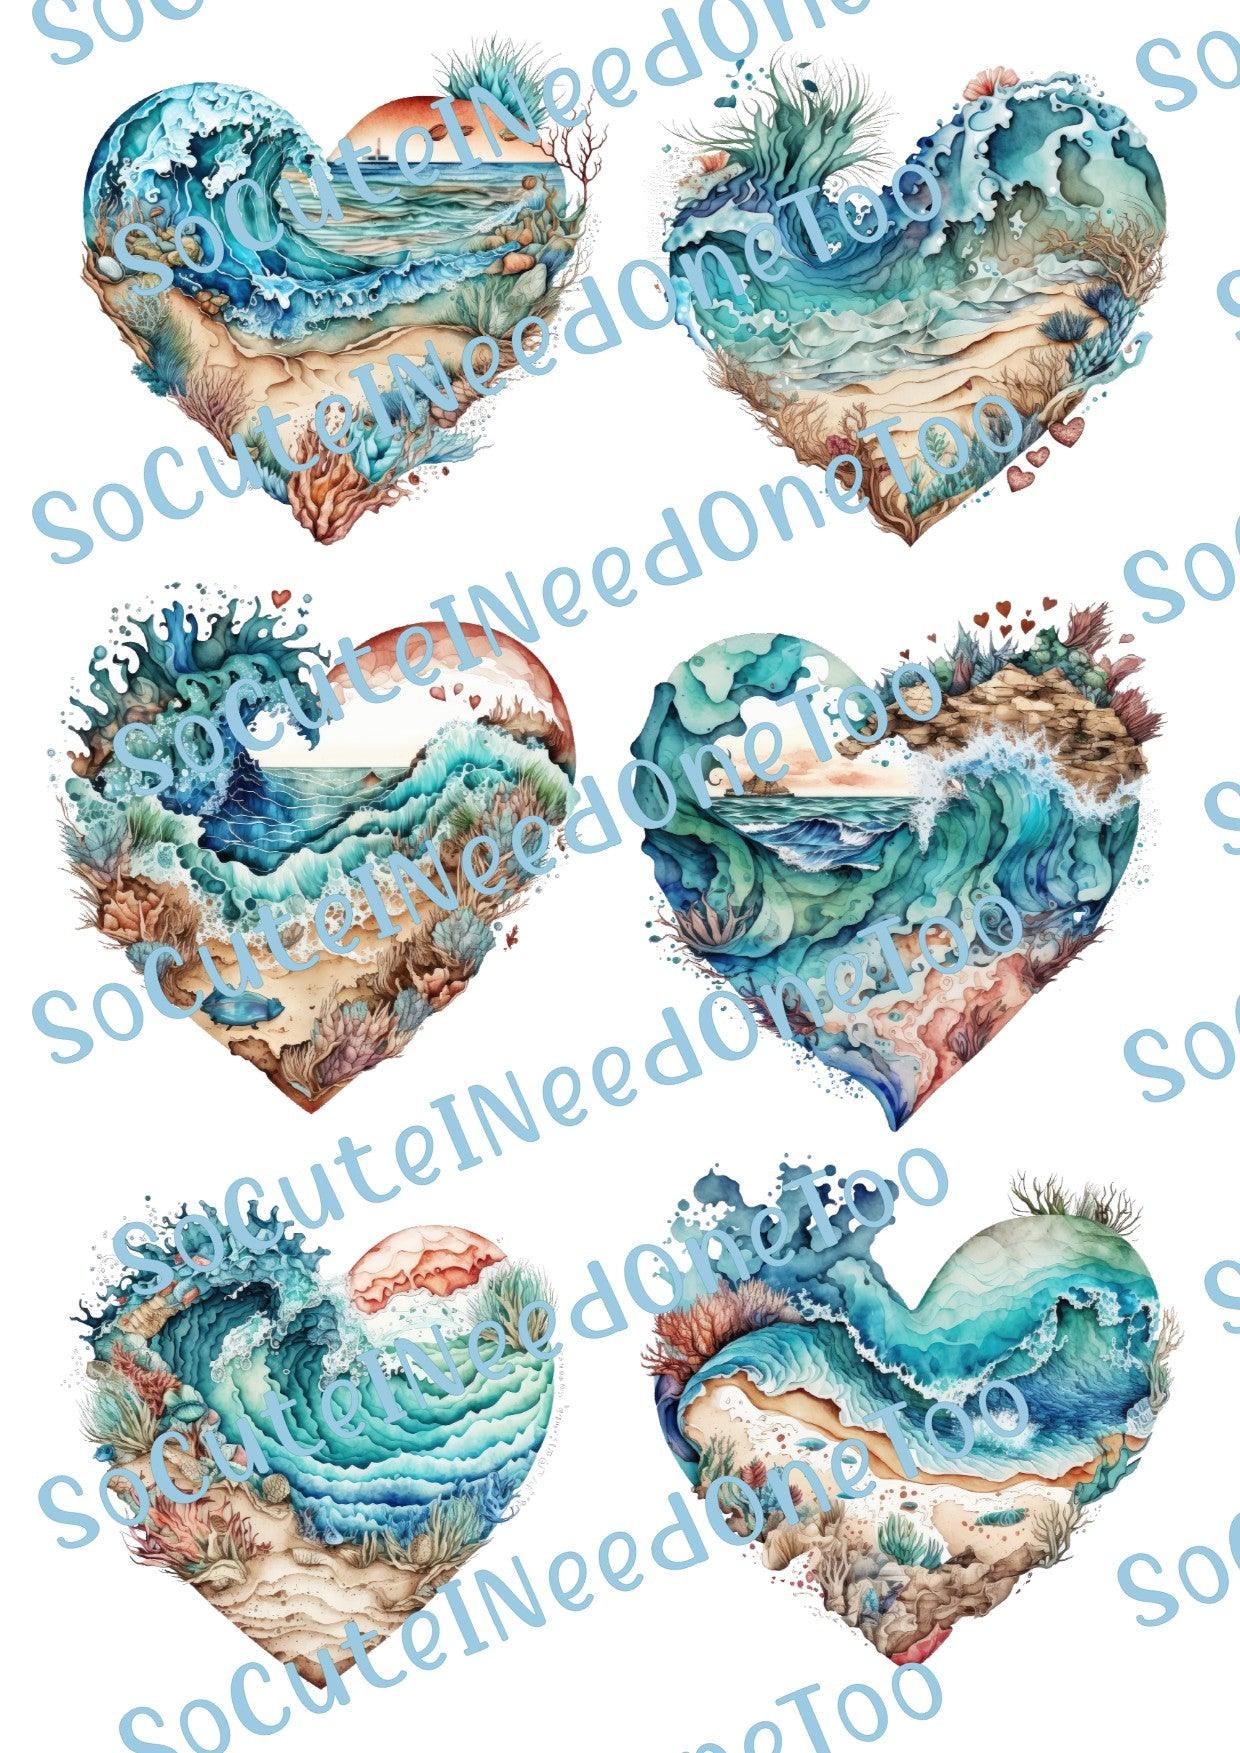 Ocean Hearts on Clear/White Waterslide Paper Ready To Use - SoCuteINeedOneToo